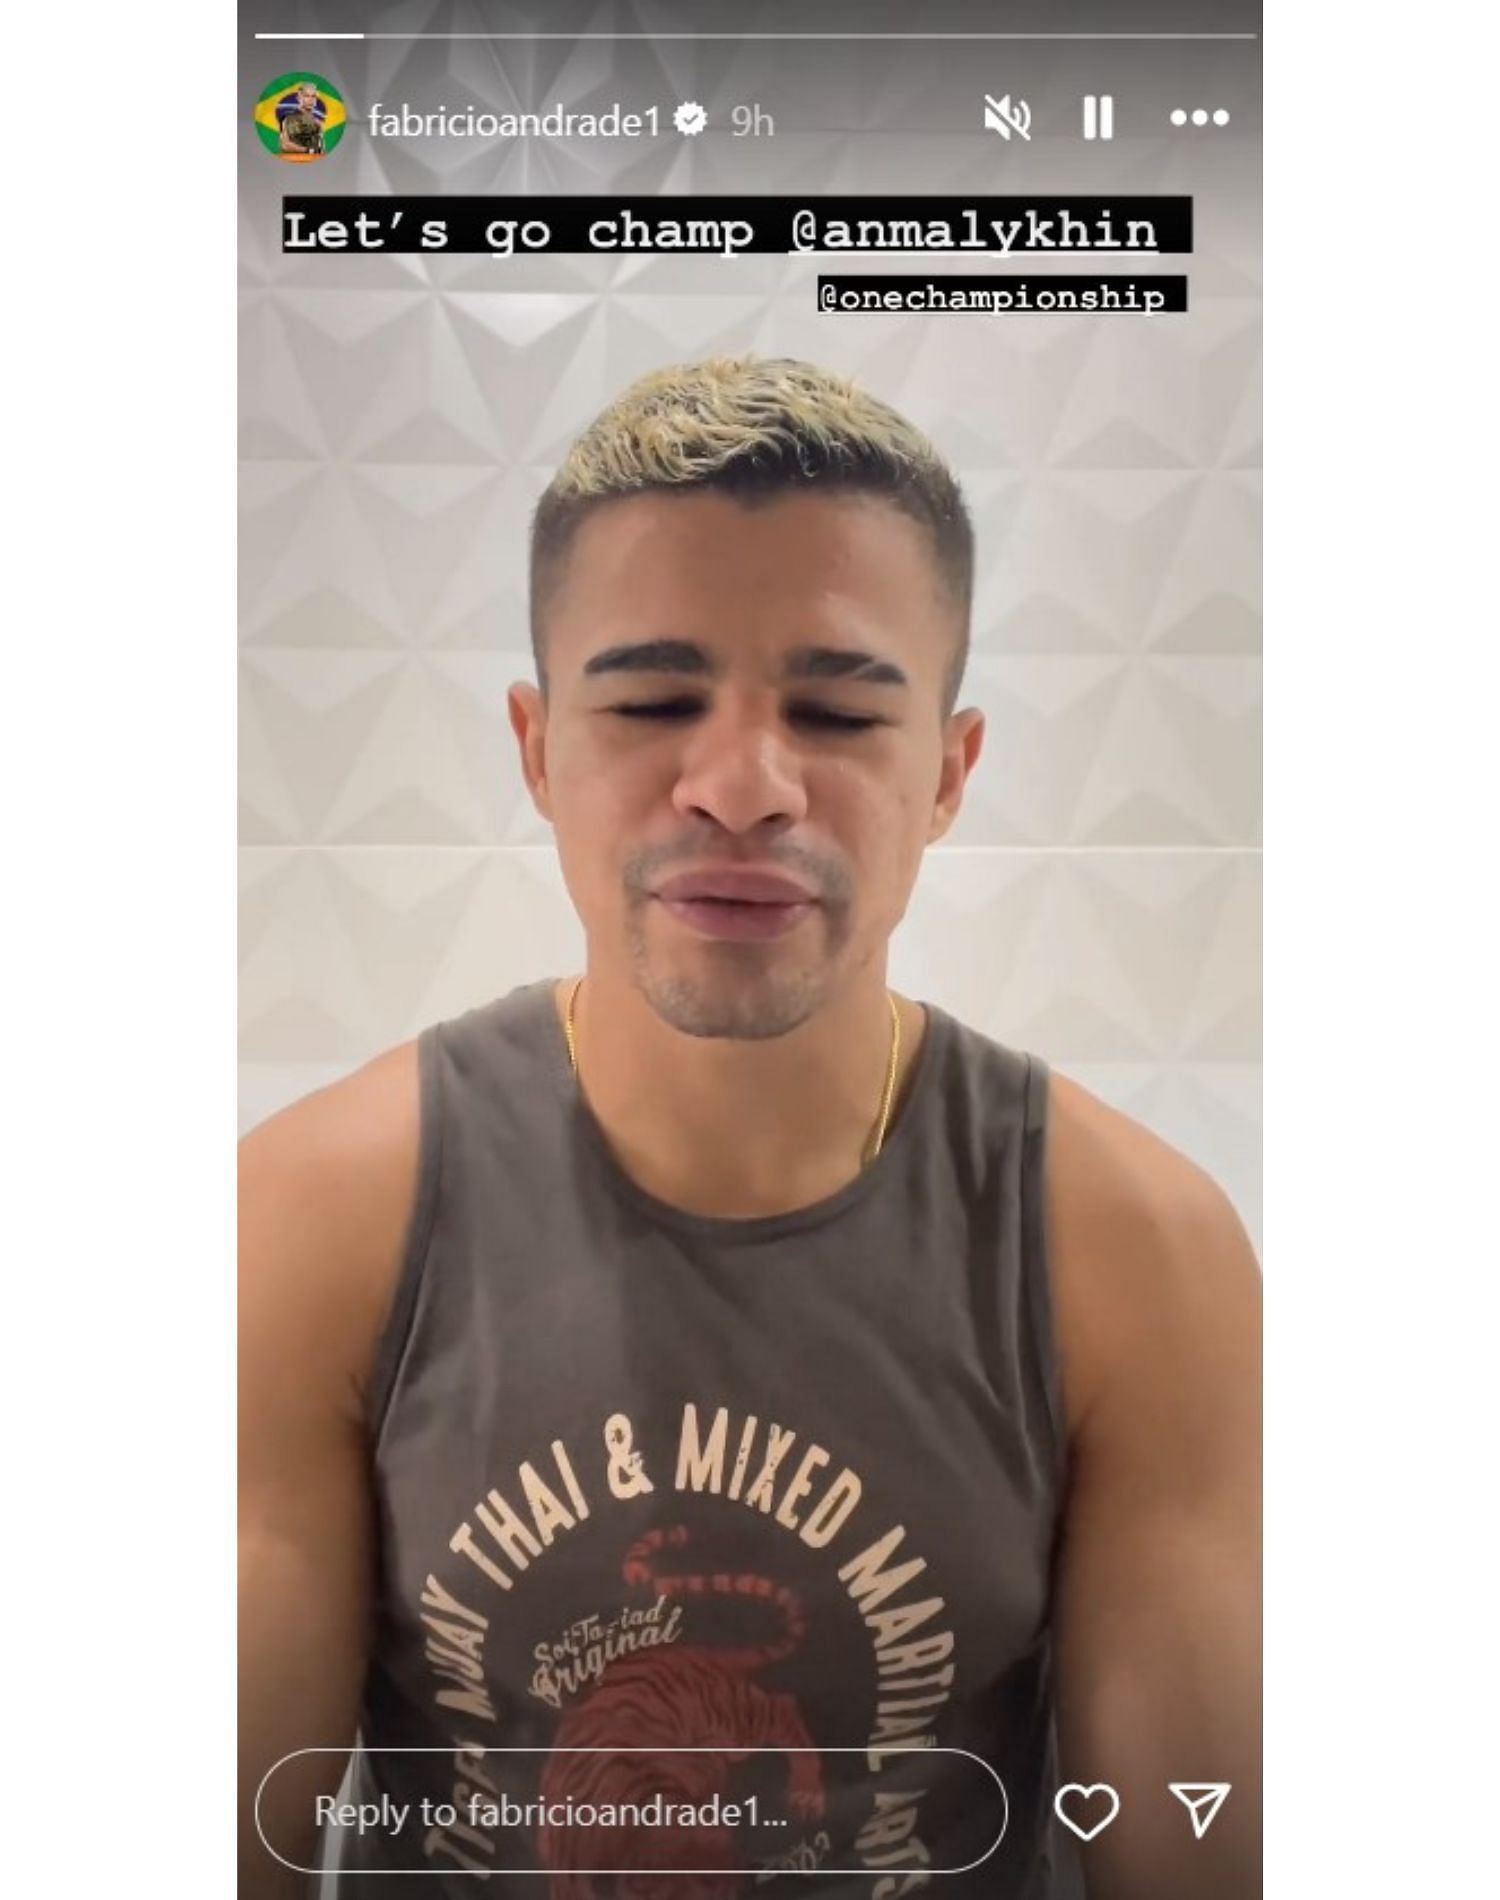 Fabricio Andrade gives his support to Anatoly Malykhin in an Instagram story.